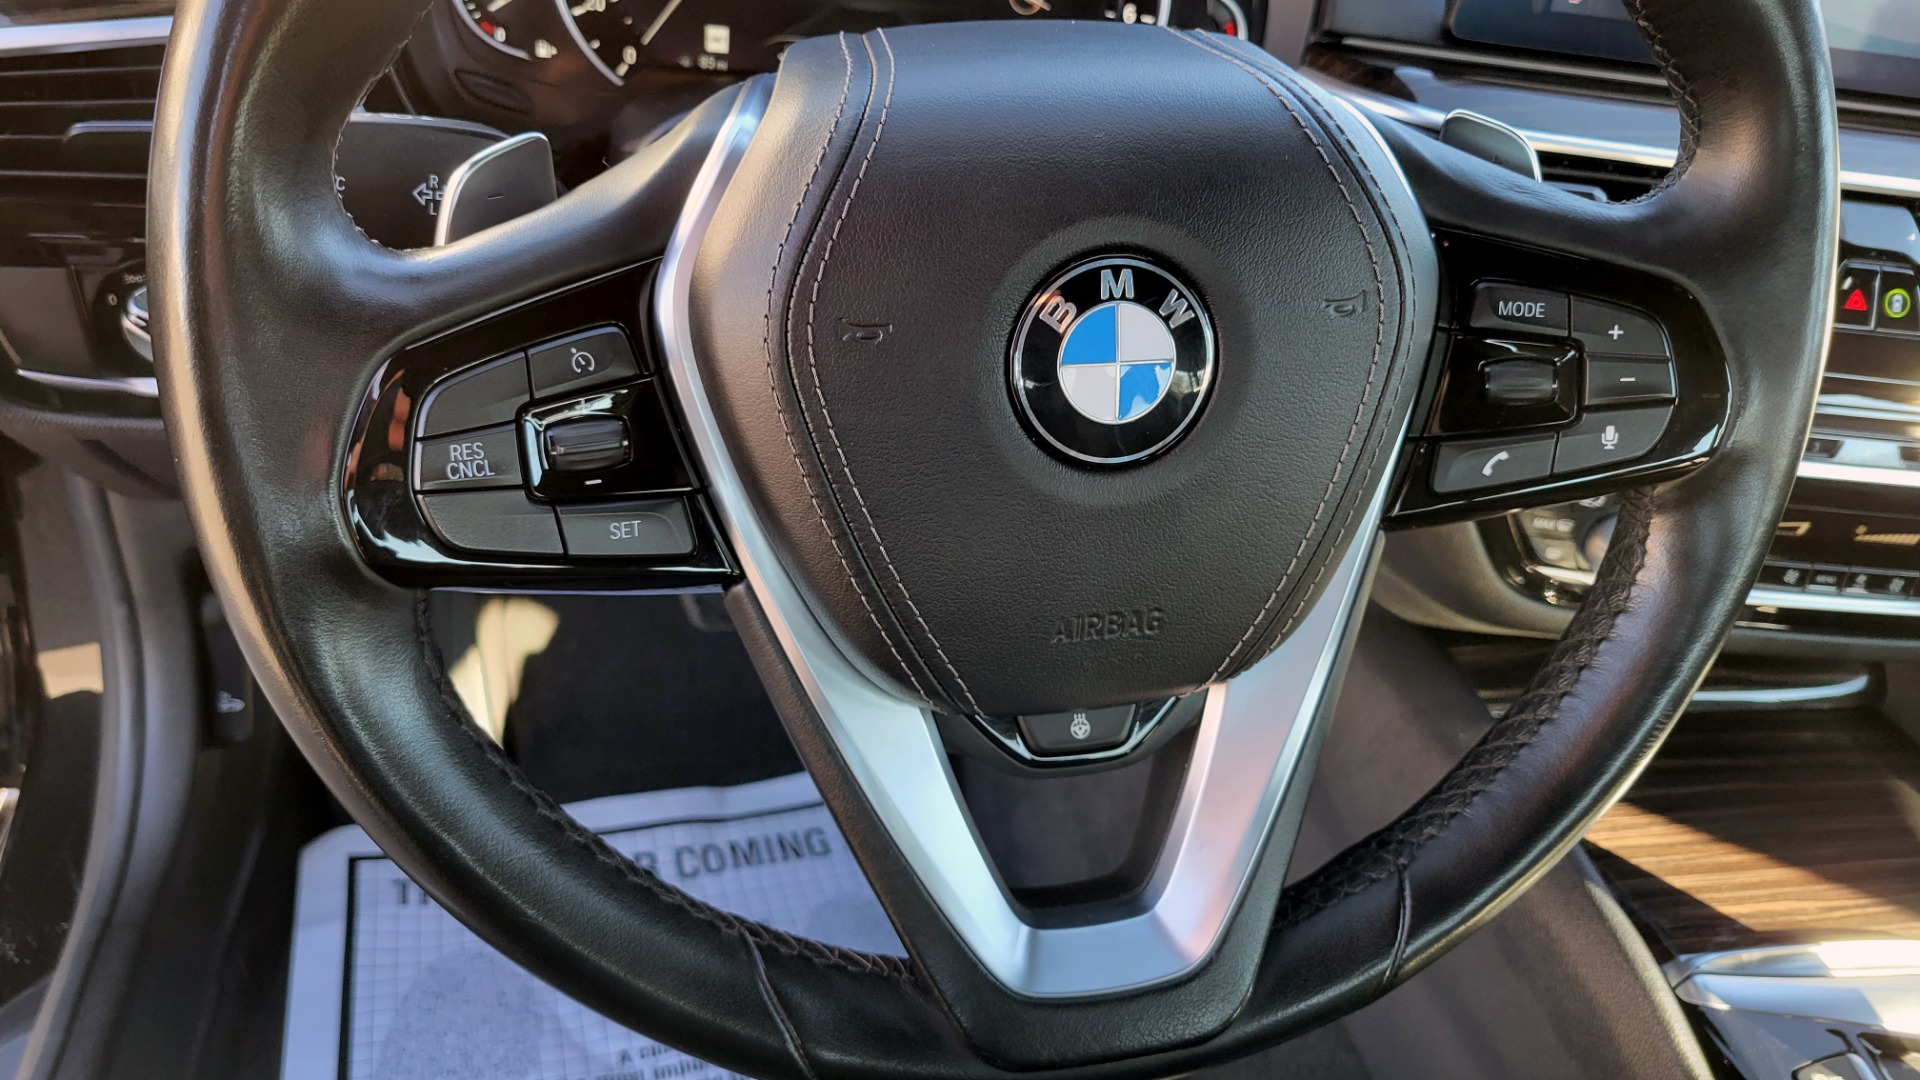 Used 2019 BMW 5 SERIES 530I XDRIVE CONVENIENCE PKG / NAV / SUNROOF / REARVIEW for sale $41,595 at Formula Imports in Charlotte NC 28227 36